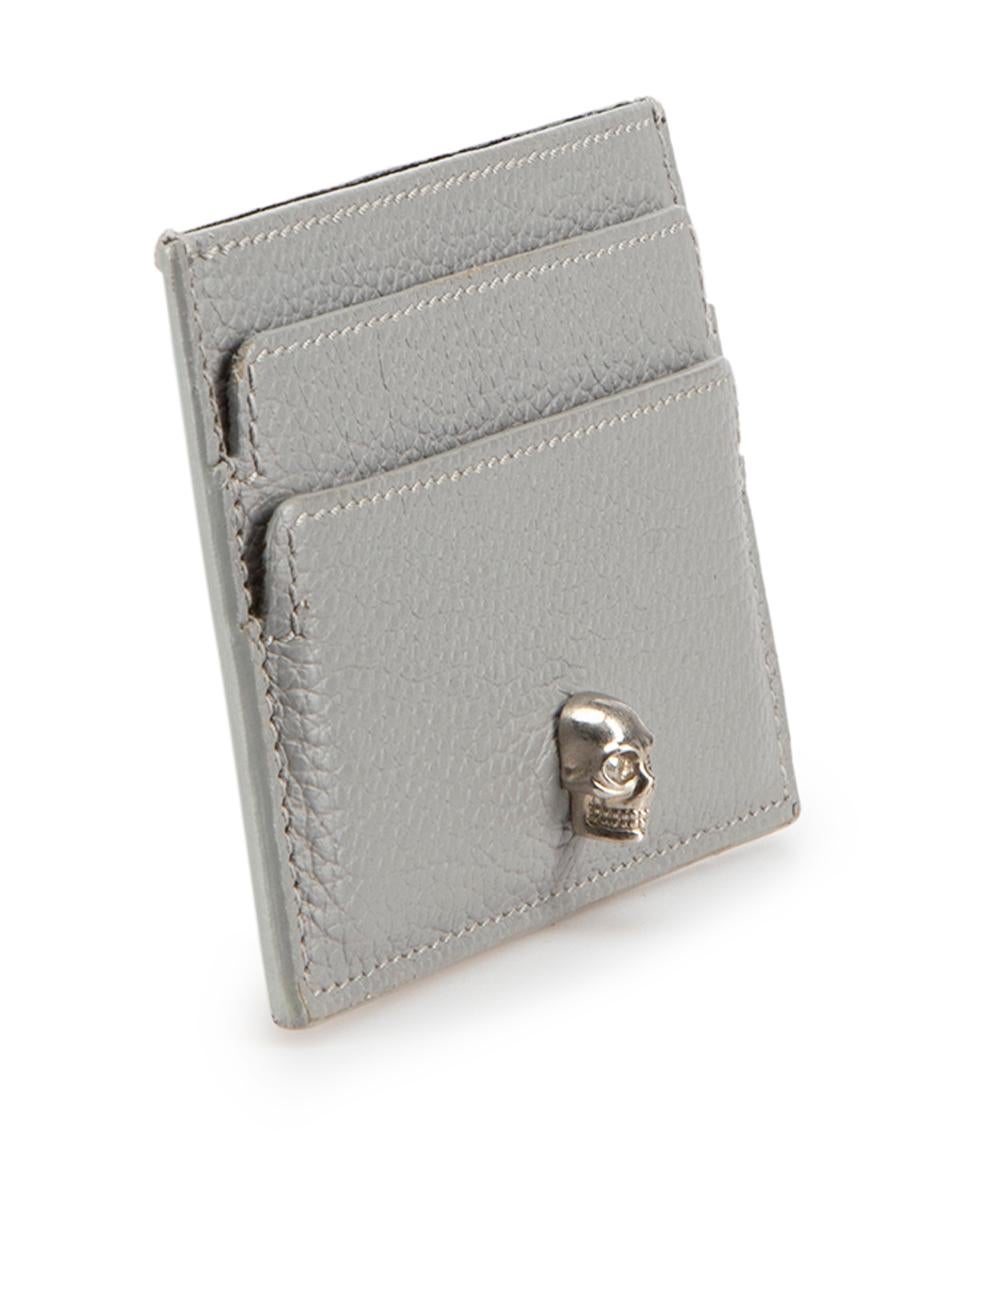 CONDITION is Very good. Minimal wear to card holder is evident. Minimal wear to the front-left base corner with light scuffing to the trim on this used Alexander McQueen designer resale item.



Details


Grey

Leather

Card holder

Silver skull